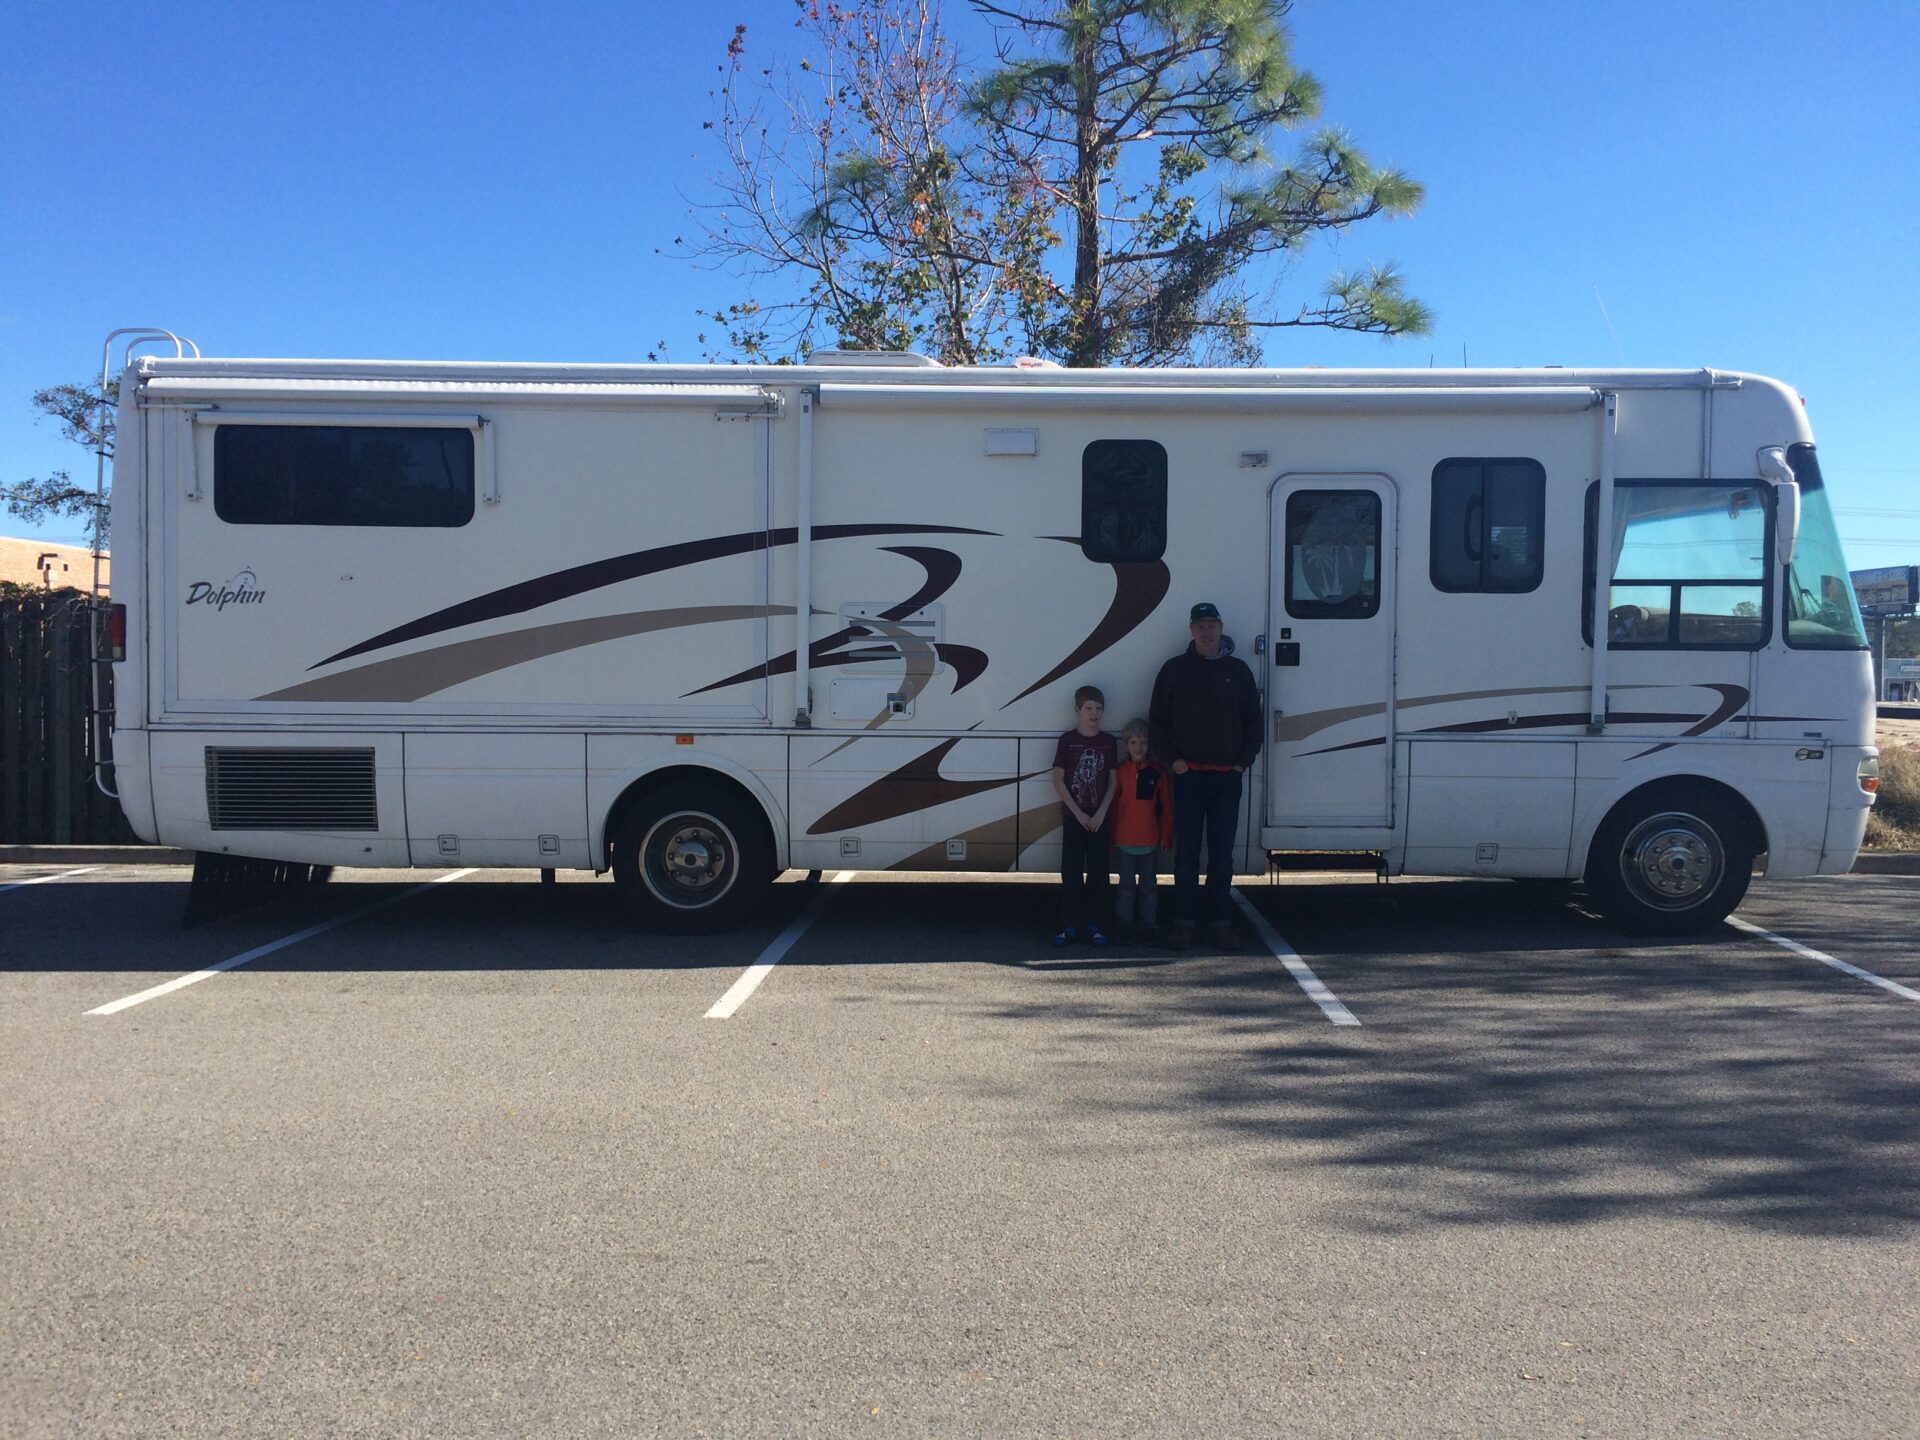 RV Rental with RV Share